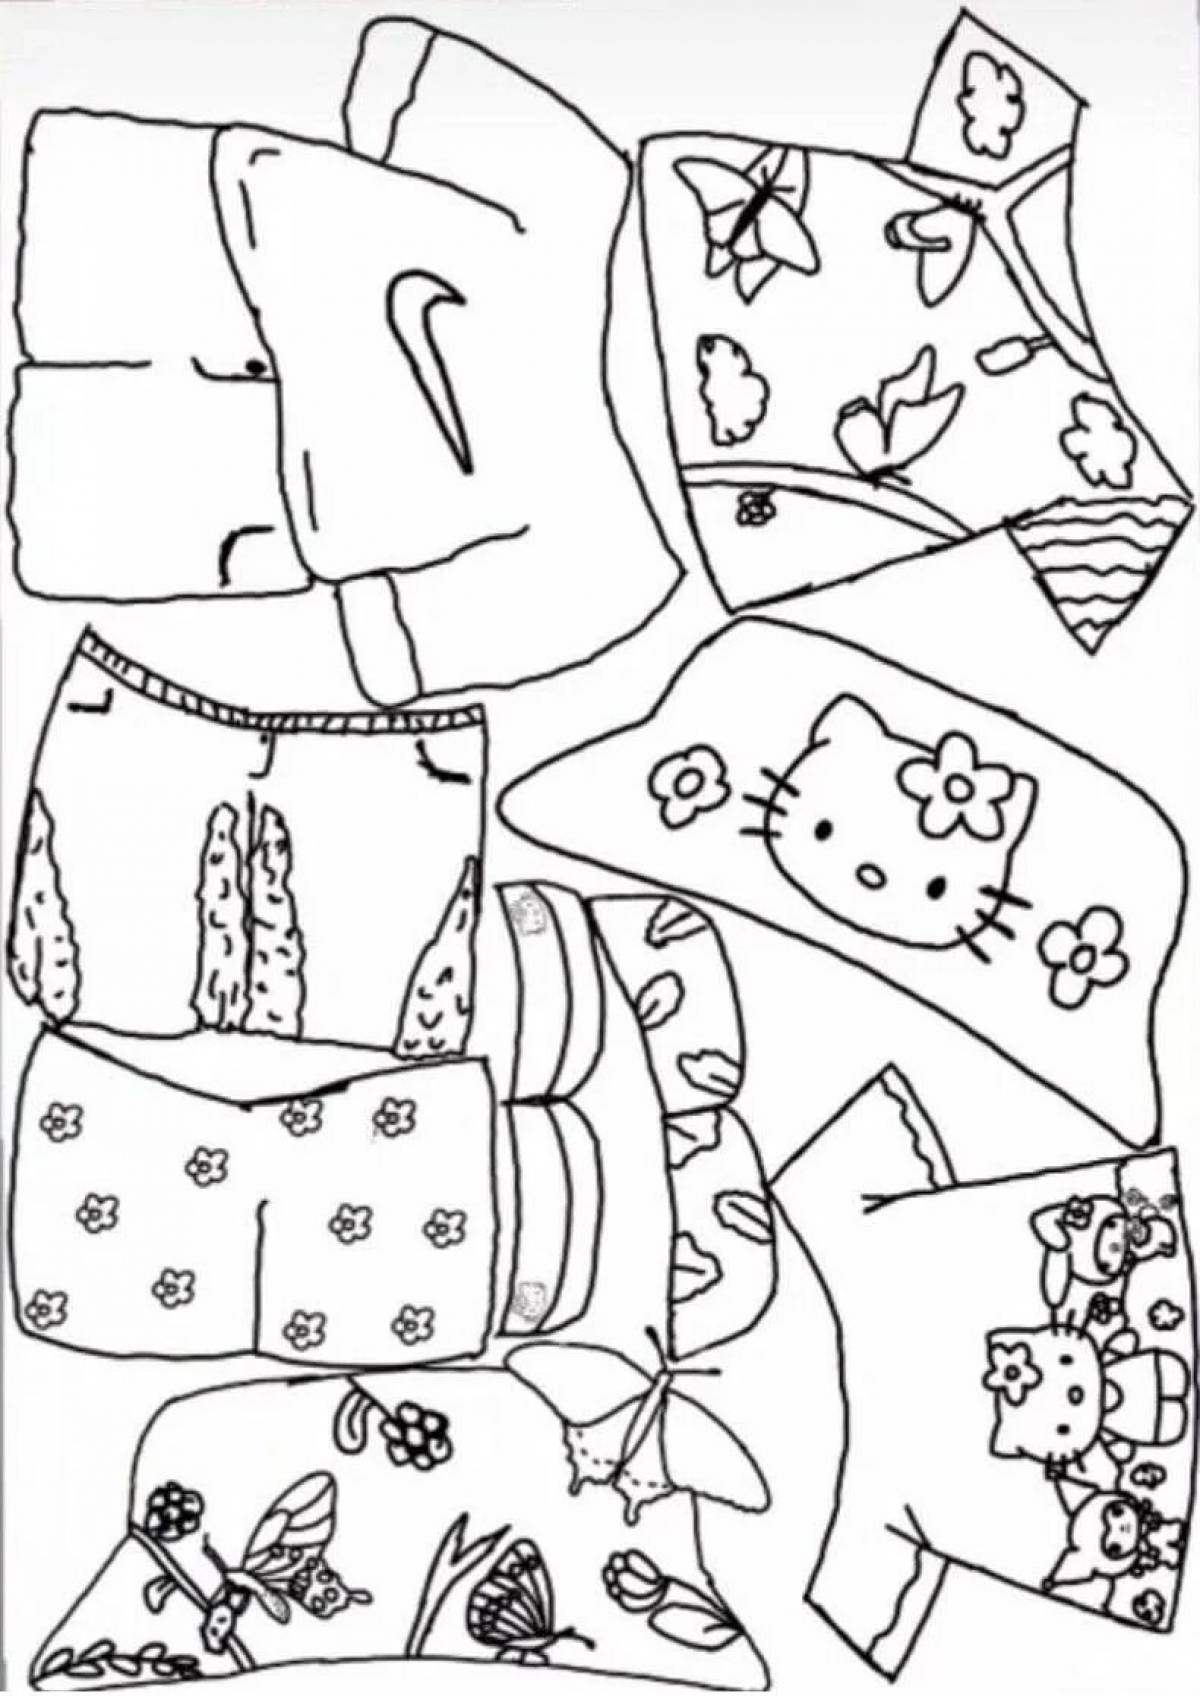 Artistic clothing coloring page for uti